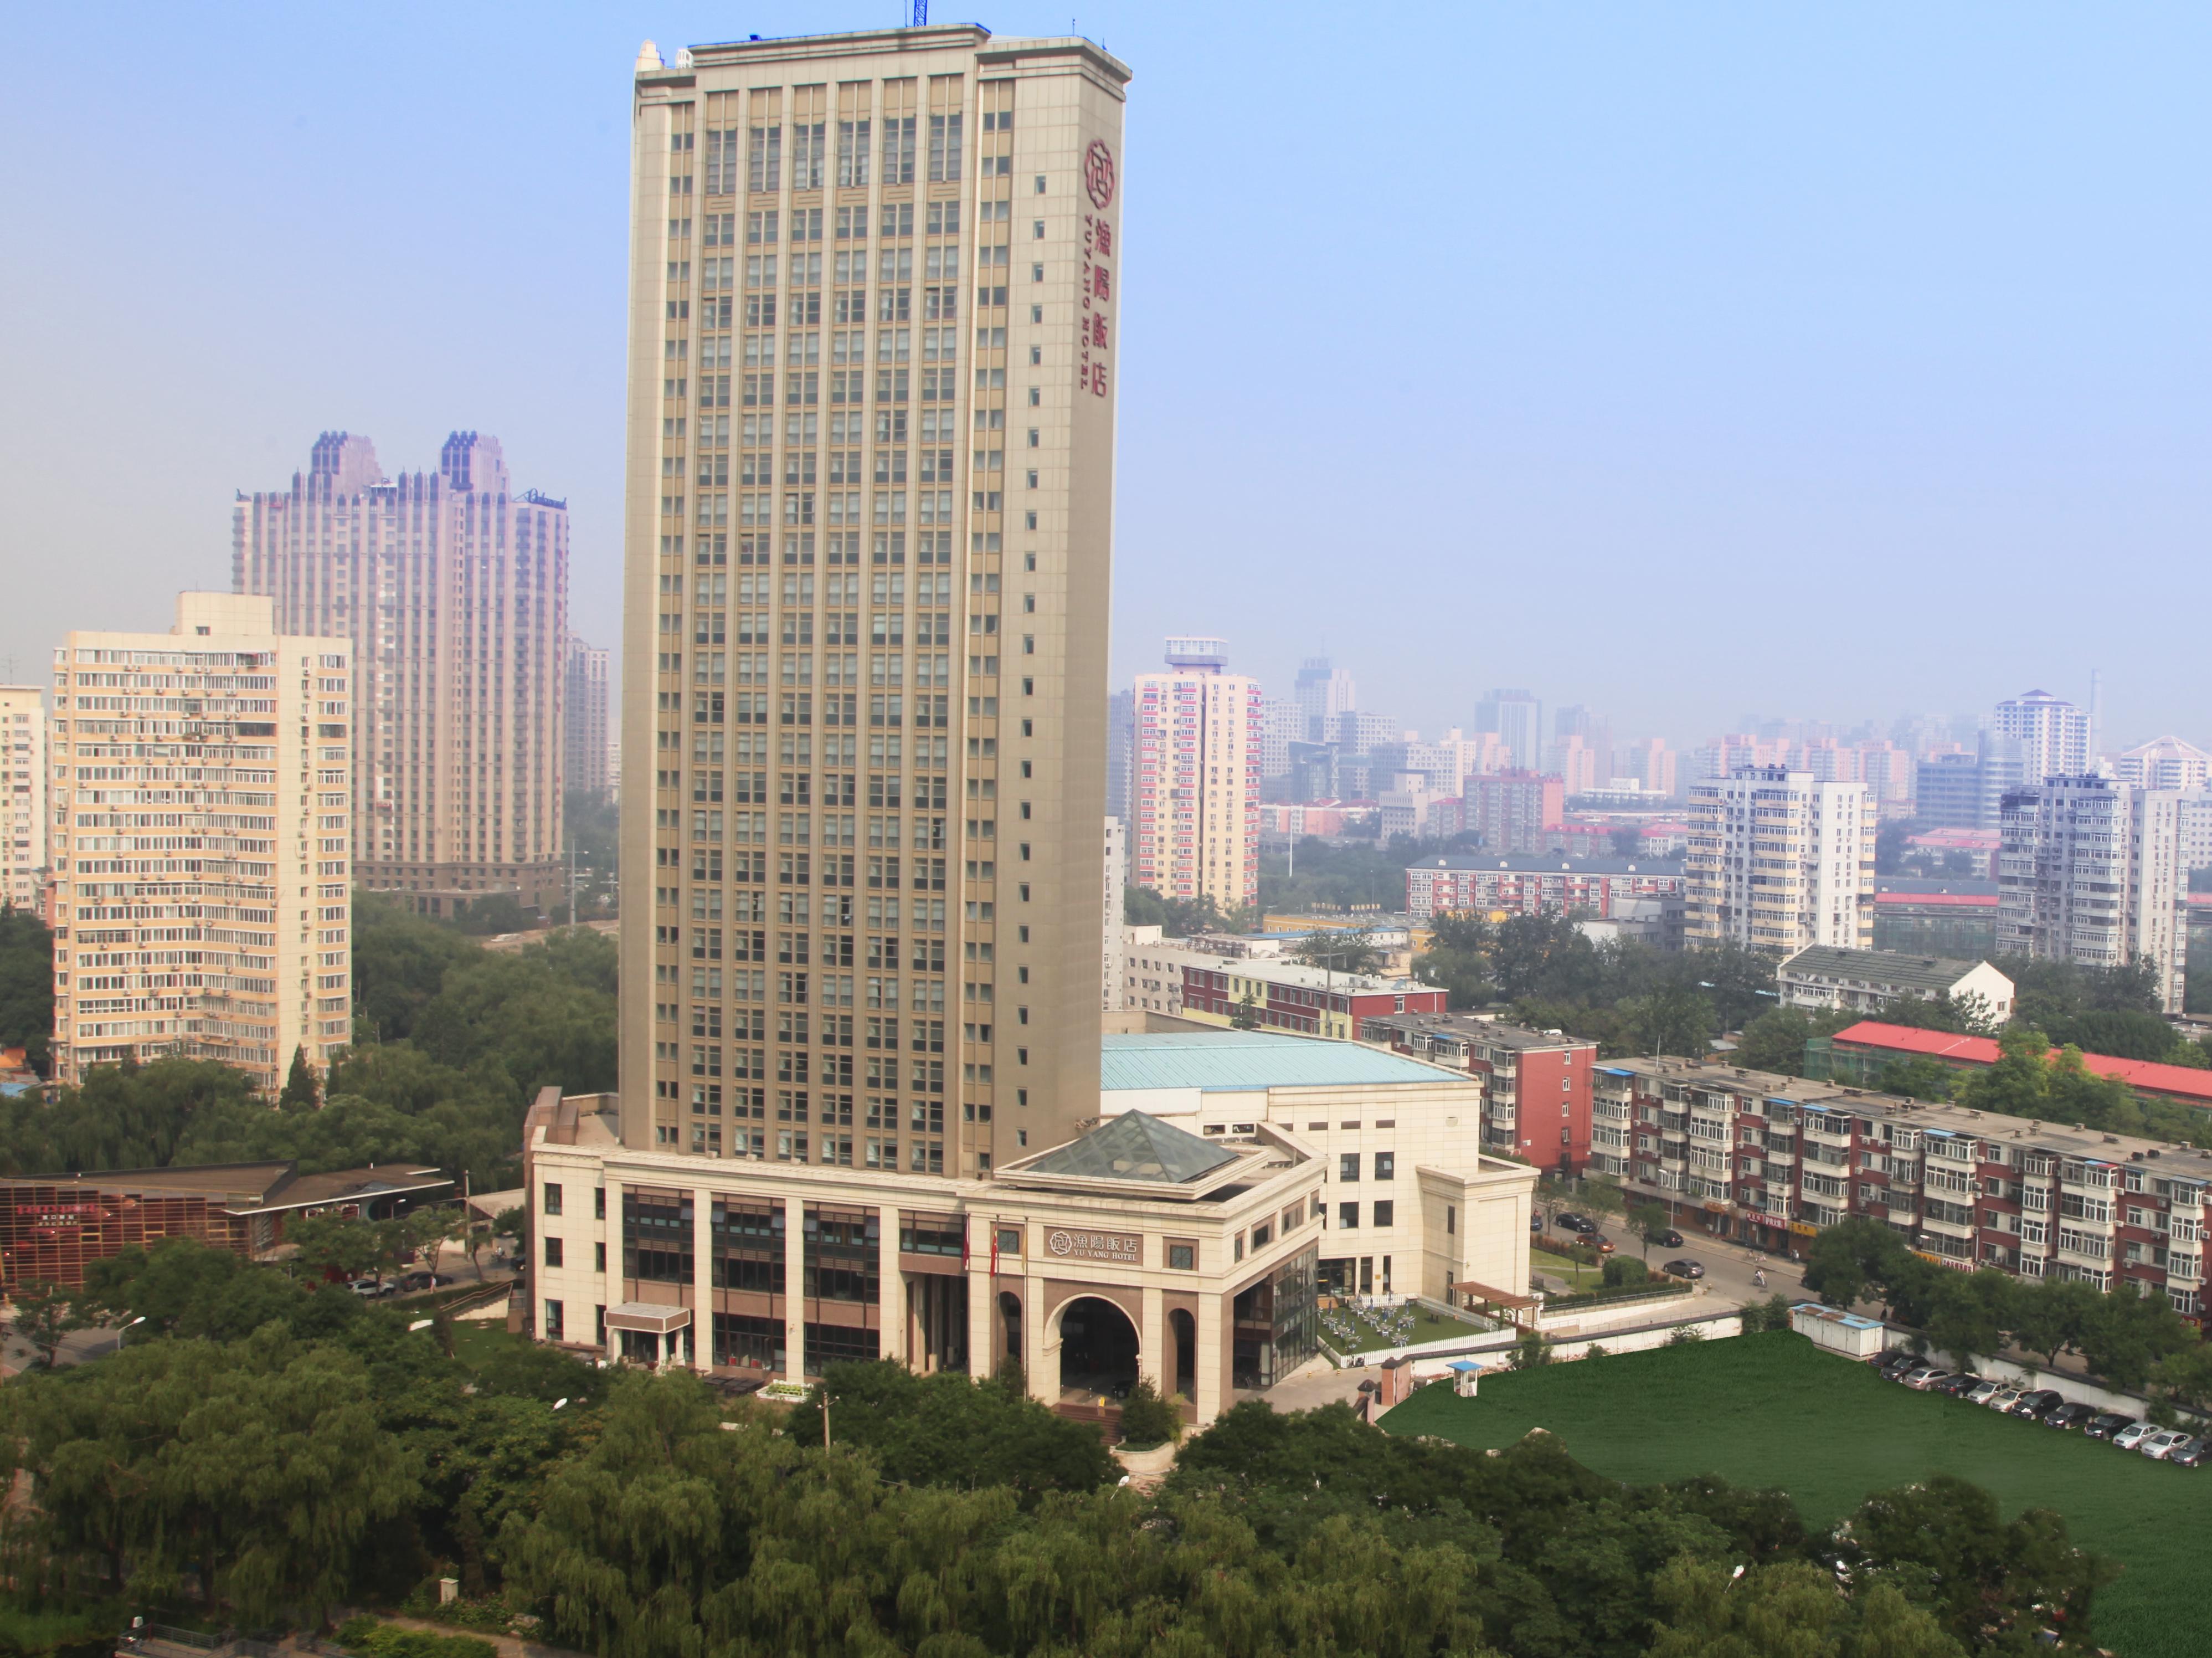 Yuyang Riverview Hotel Beijing FAQ 2016, What facilities are there in Yuyang Riverview Hotel Beijing 2016, What Languages Spoken are Supported in Yuyang Riverview Hotel Beijing 2016, Which payment cards are accepted in Yuyang Riverview Hotel Beijing , Beijing Yuyang Riverview Hotel room facilities and services Q&A 2016, Beijing Yuyang Riverview Hotel online booking services 2016, Beijing Yuyang Riverview Hotel address 2016, Beijing Yuyang Riverview Hotel telephone number 2016,Beijing Yuyang Riverview Hotel map 2016, Beijing Yuyang Riverview Hotel traffic guide 2016, how to go Beijing Yuyang Riverview Hotel, Beijing Yuyang Riverview Hotel booking online 2016, Beijing Yuyang Riverview Hotel room types 2016.